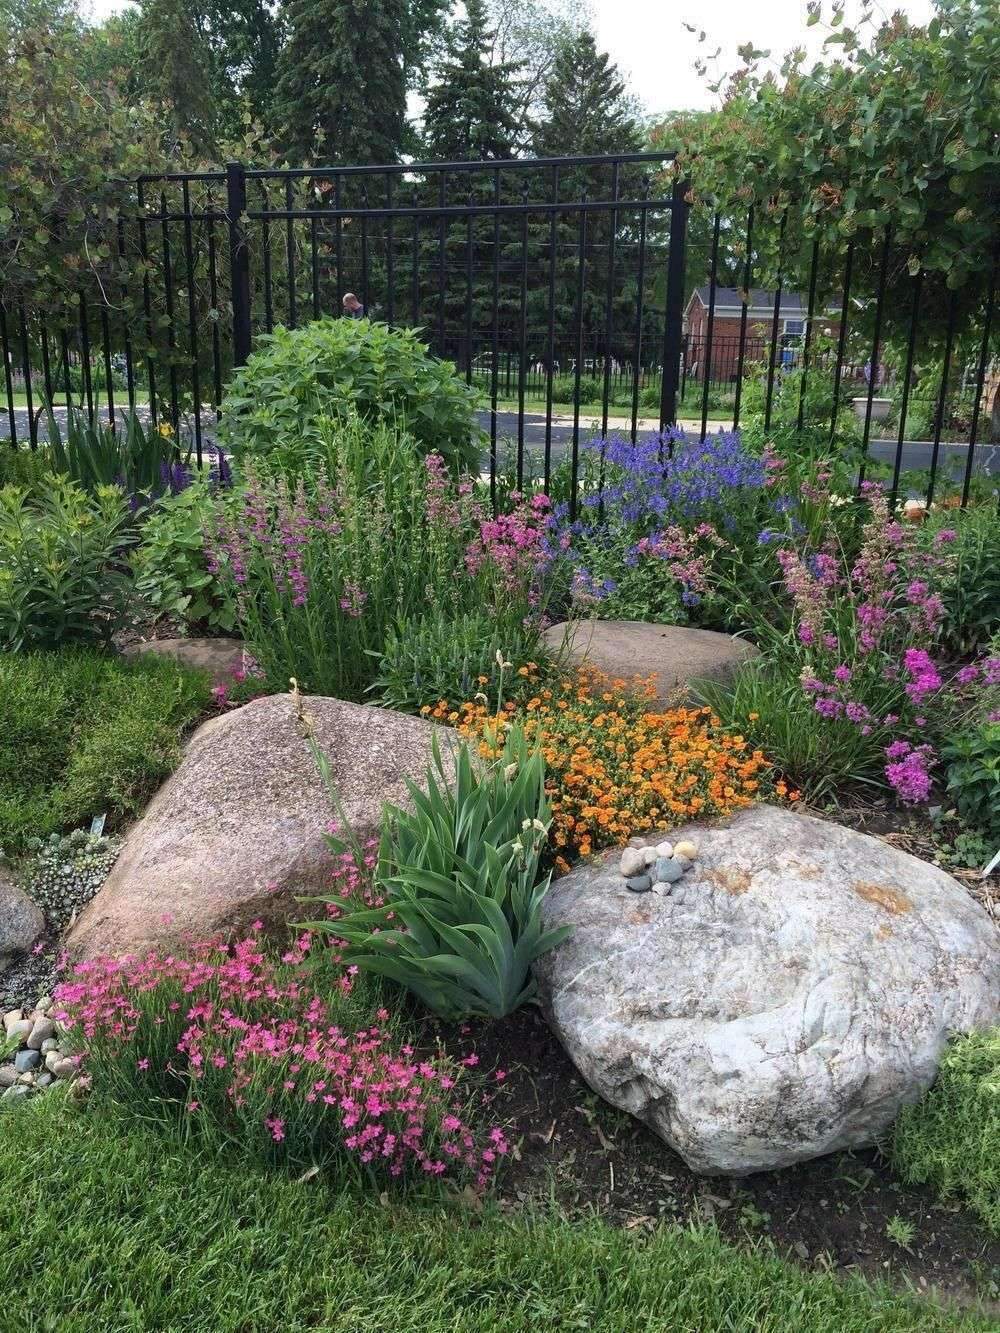 Working in rocks into your garden and beds is a beautiful way to add…